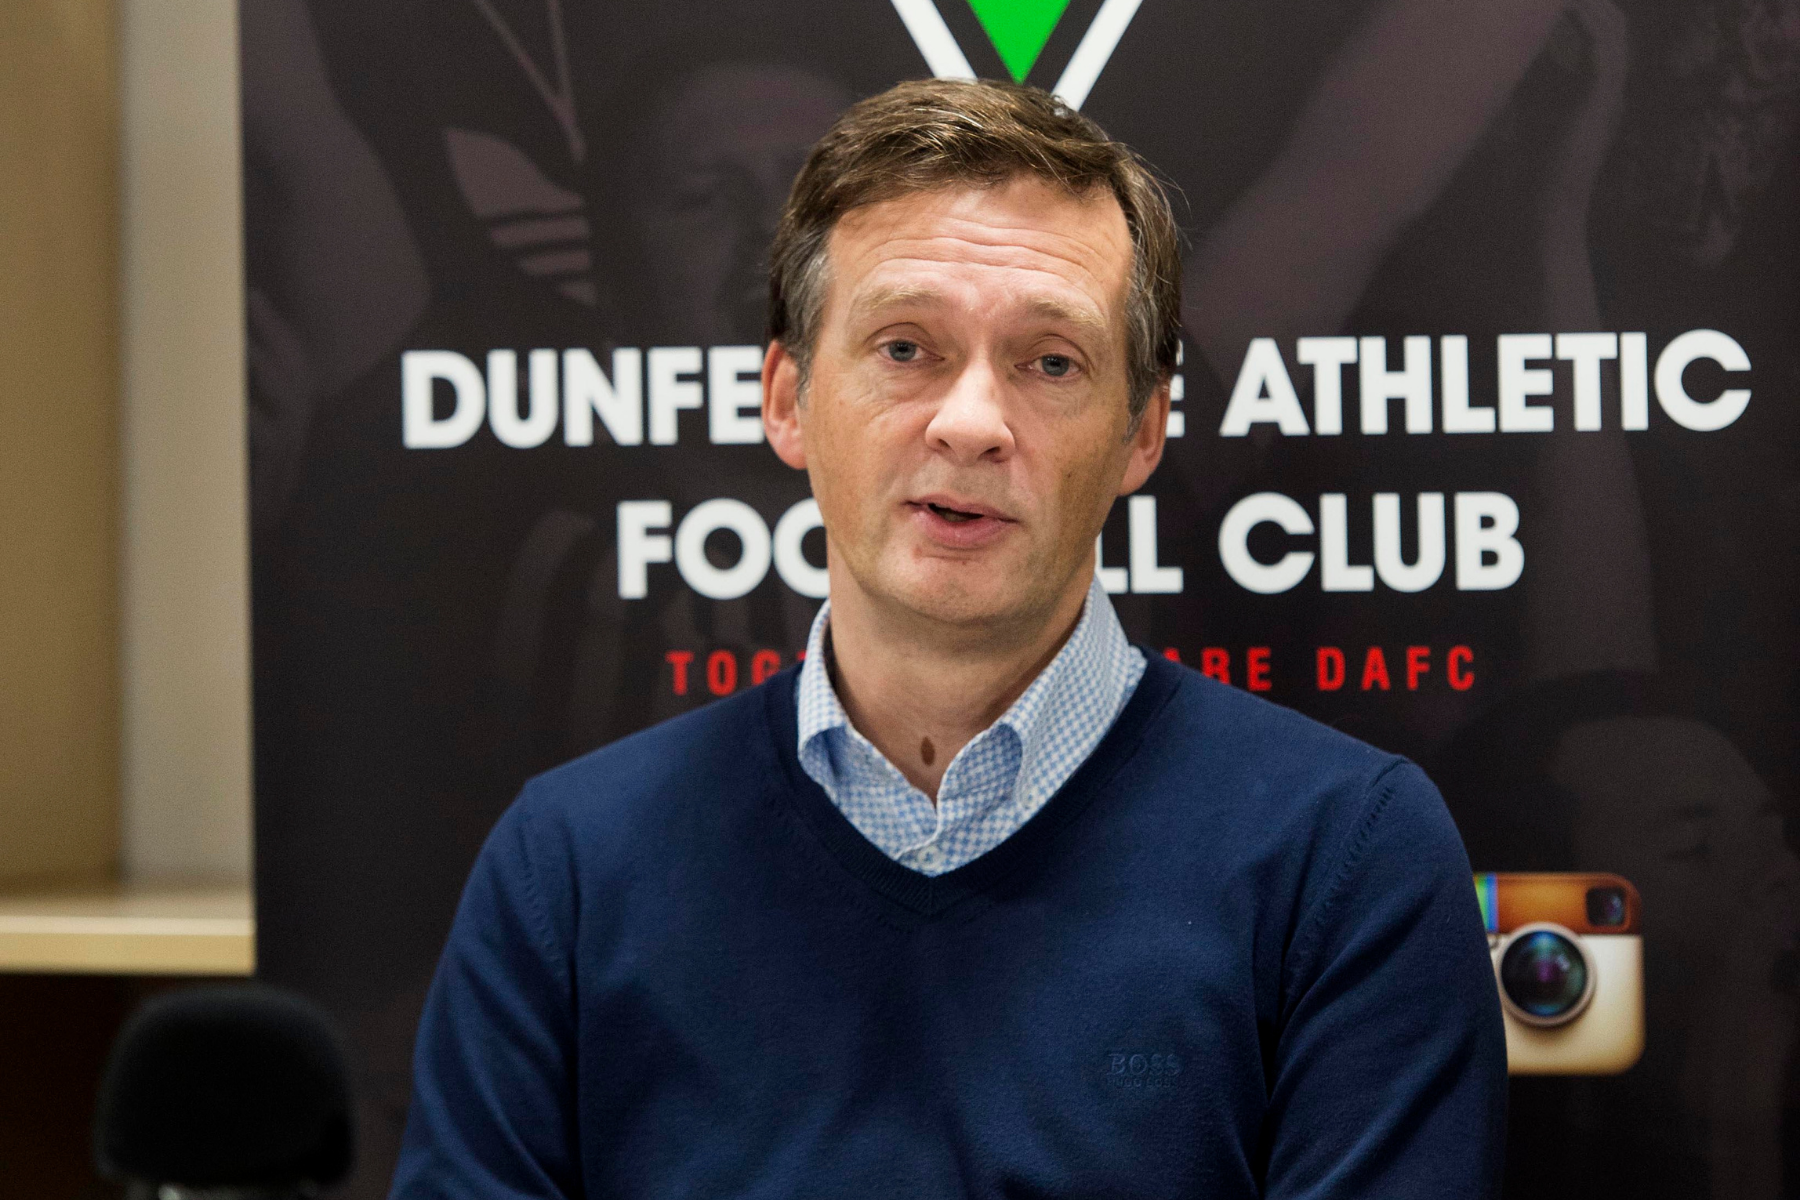 Dunfermline chairman Ross McArthur to stand down after ‘abhorrent personal abuse & attacks'